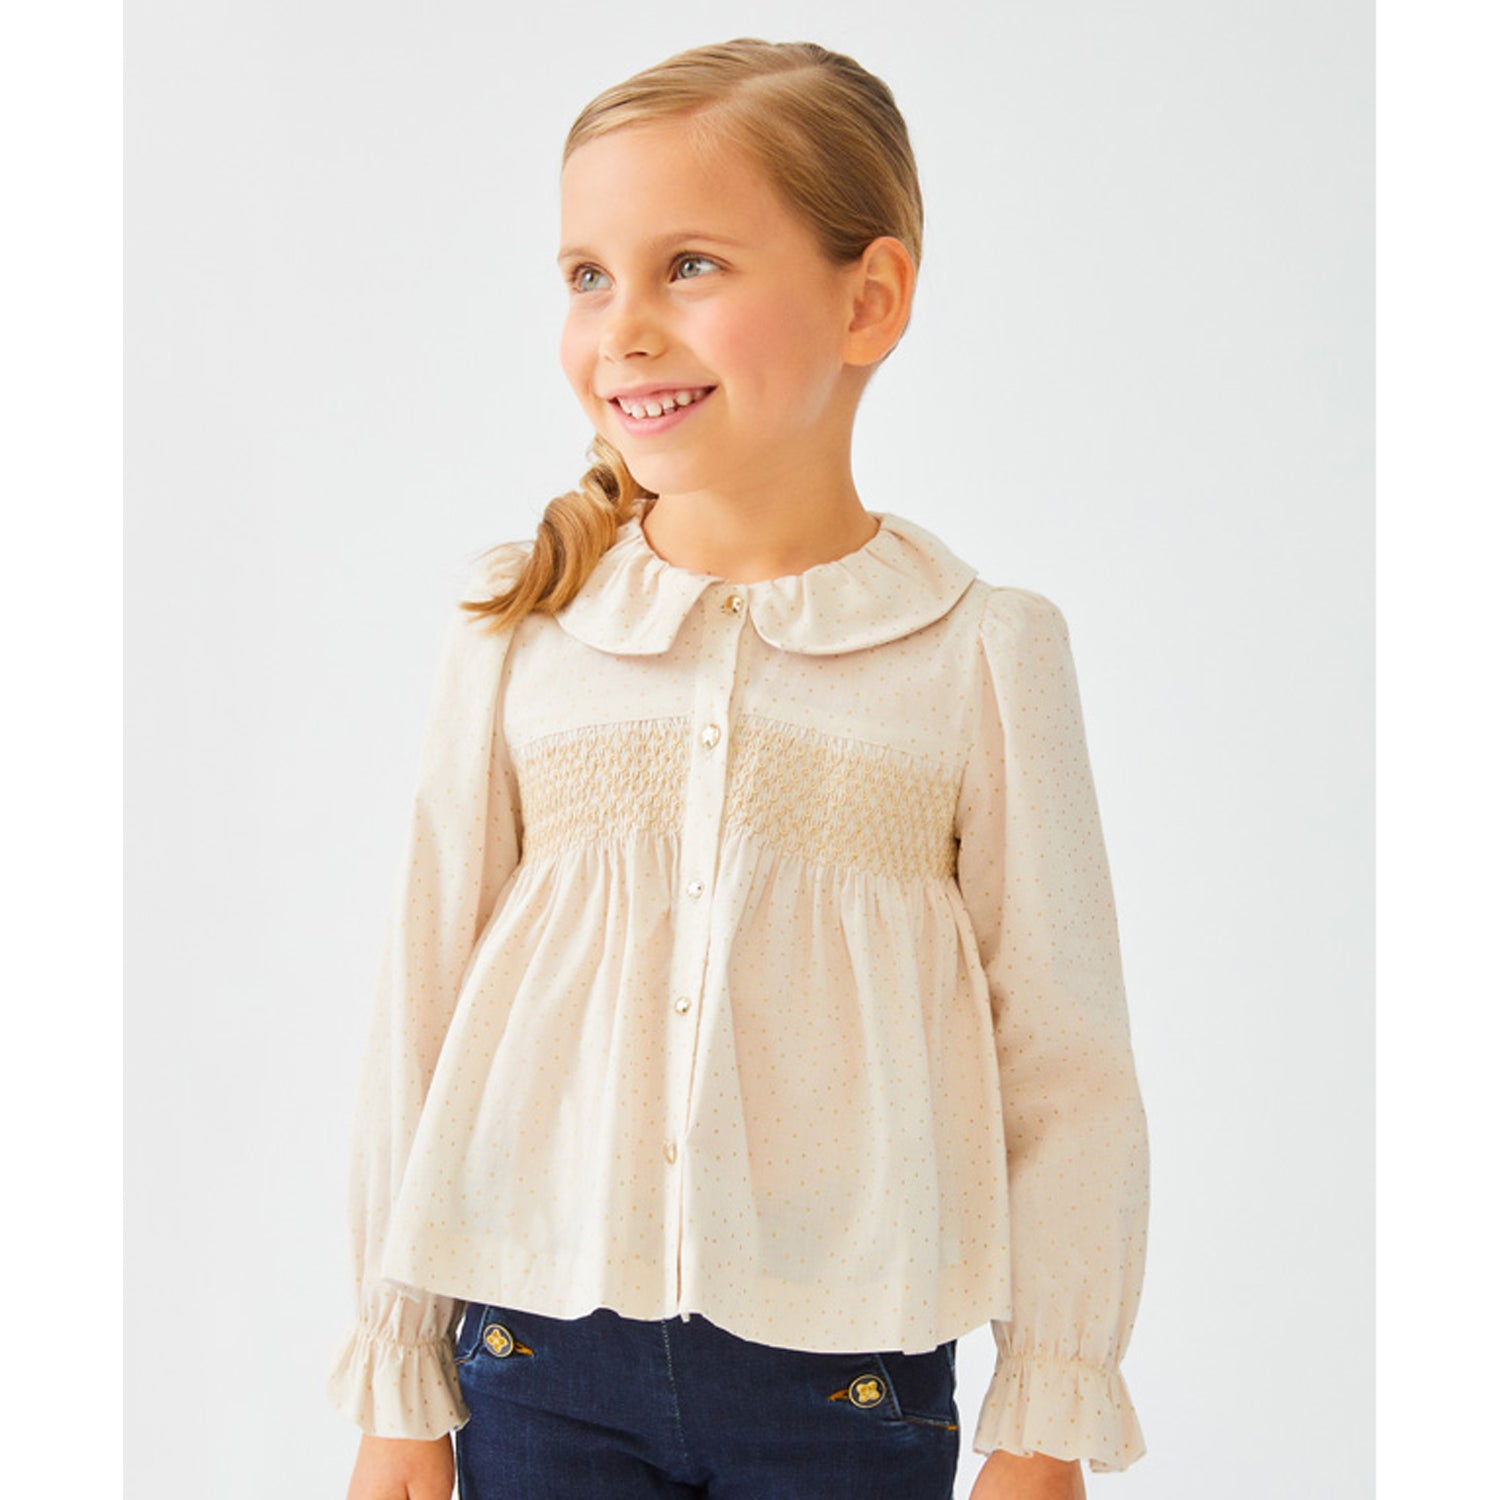 Ivory Blouse With Golden Polka Dots